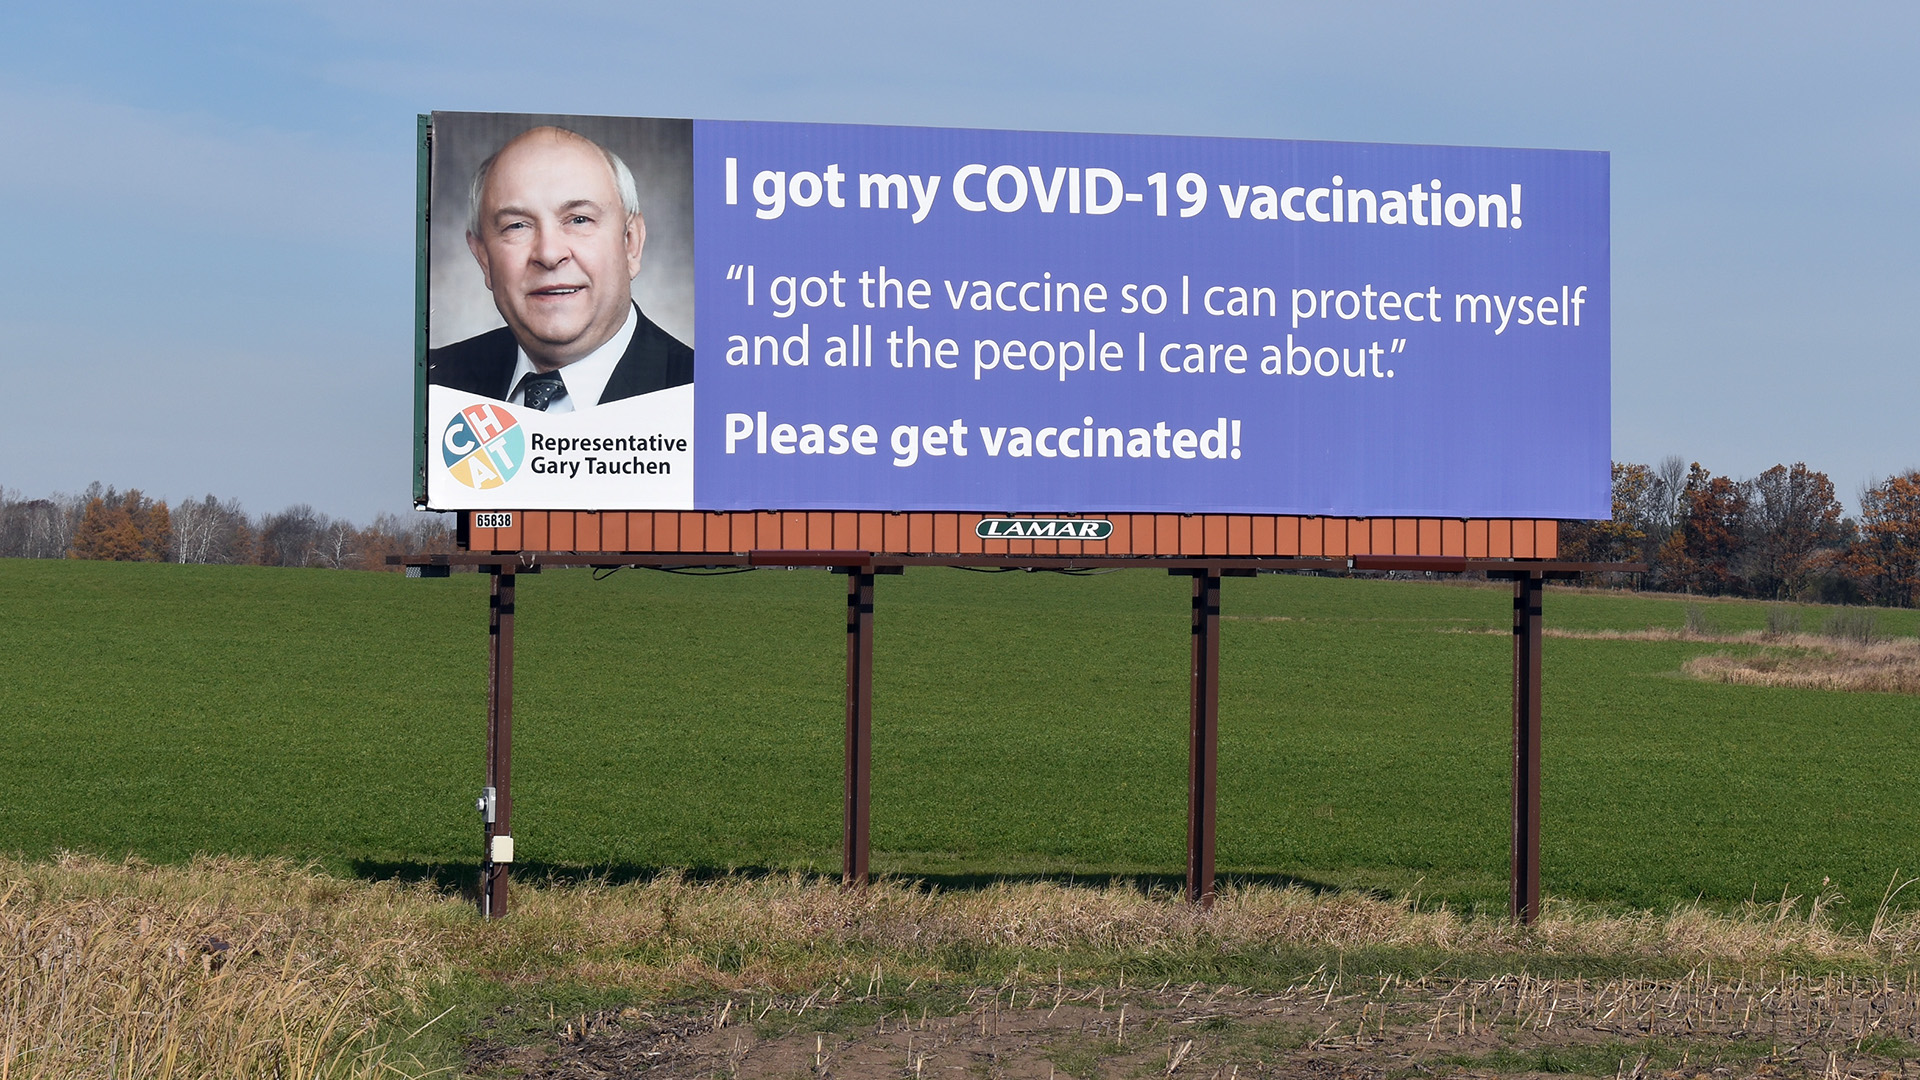 A billboard standing in a farm field reads: "I got my COVID-19 vaccination! "I got the vaccine so I can protect myself and all the people I care about." Please get vaccinated!